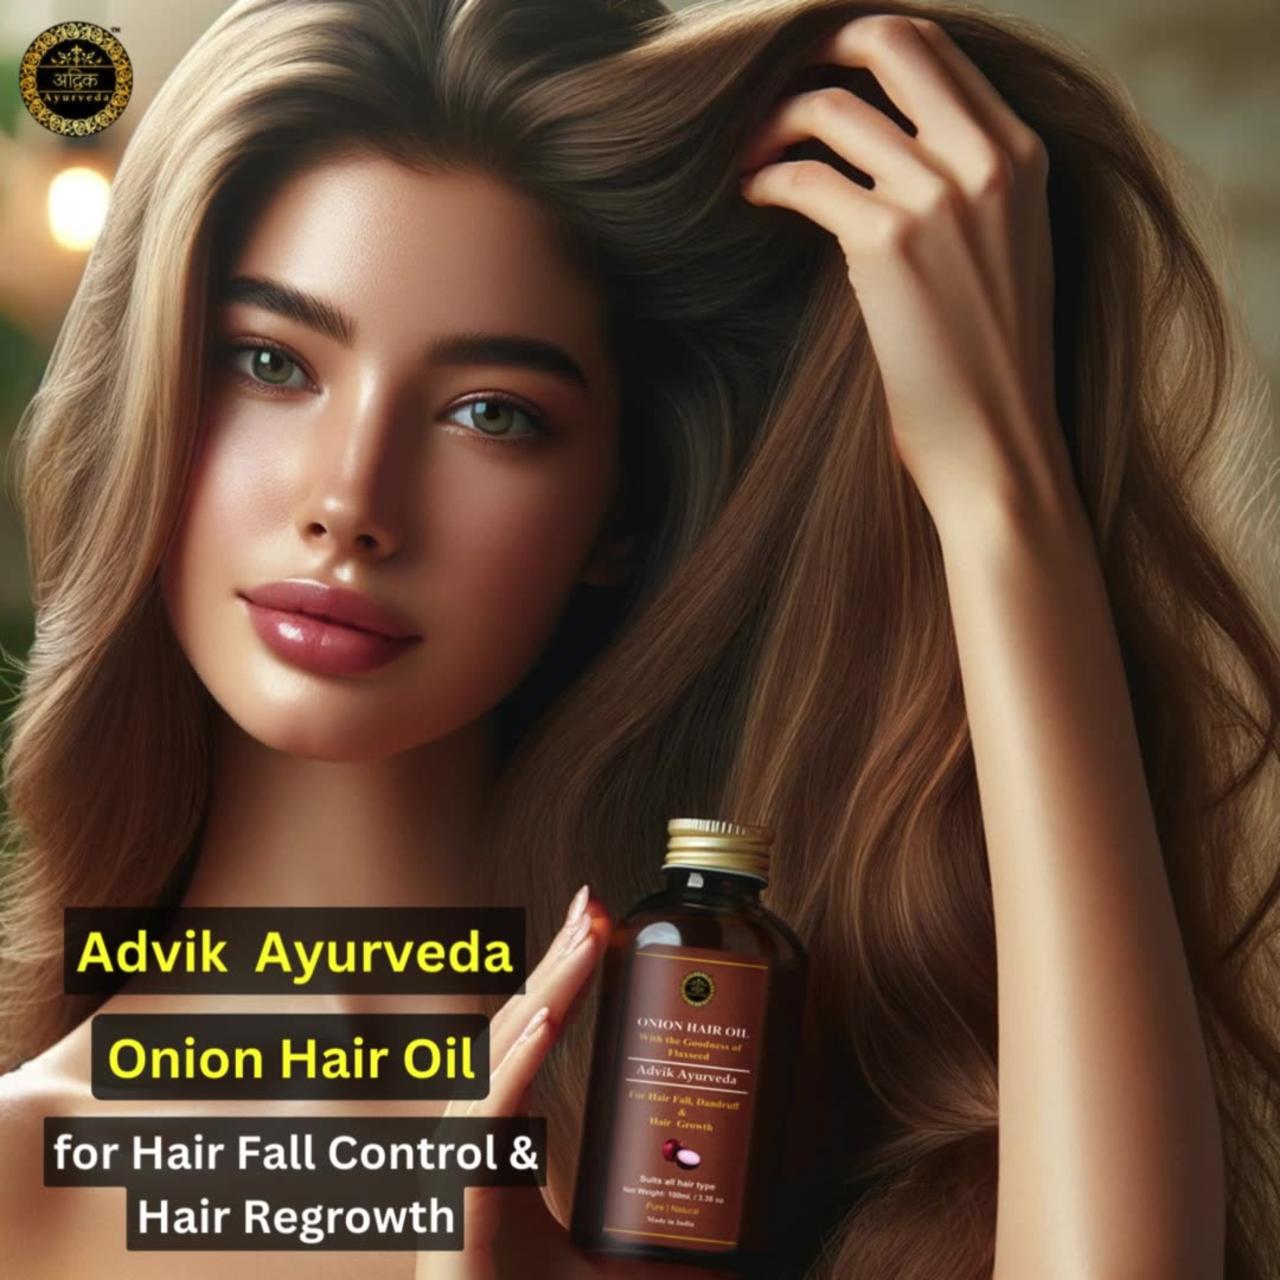 Say Goodbye to Hair Fall and Hello to Gorgeous Locks with Onion Hair Oil!